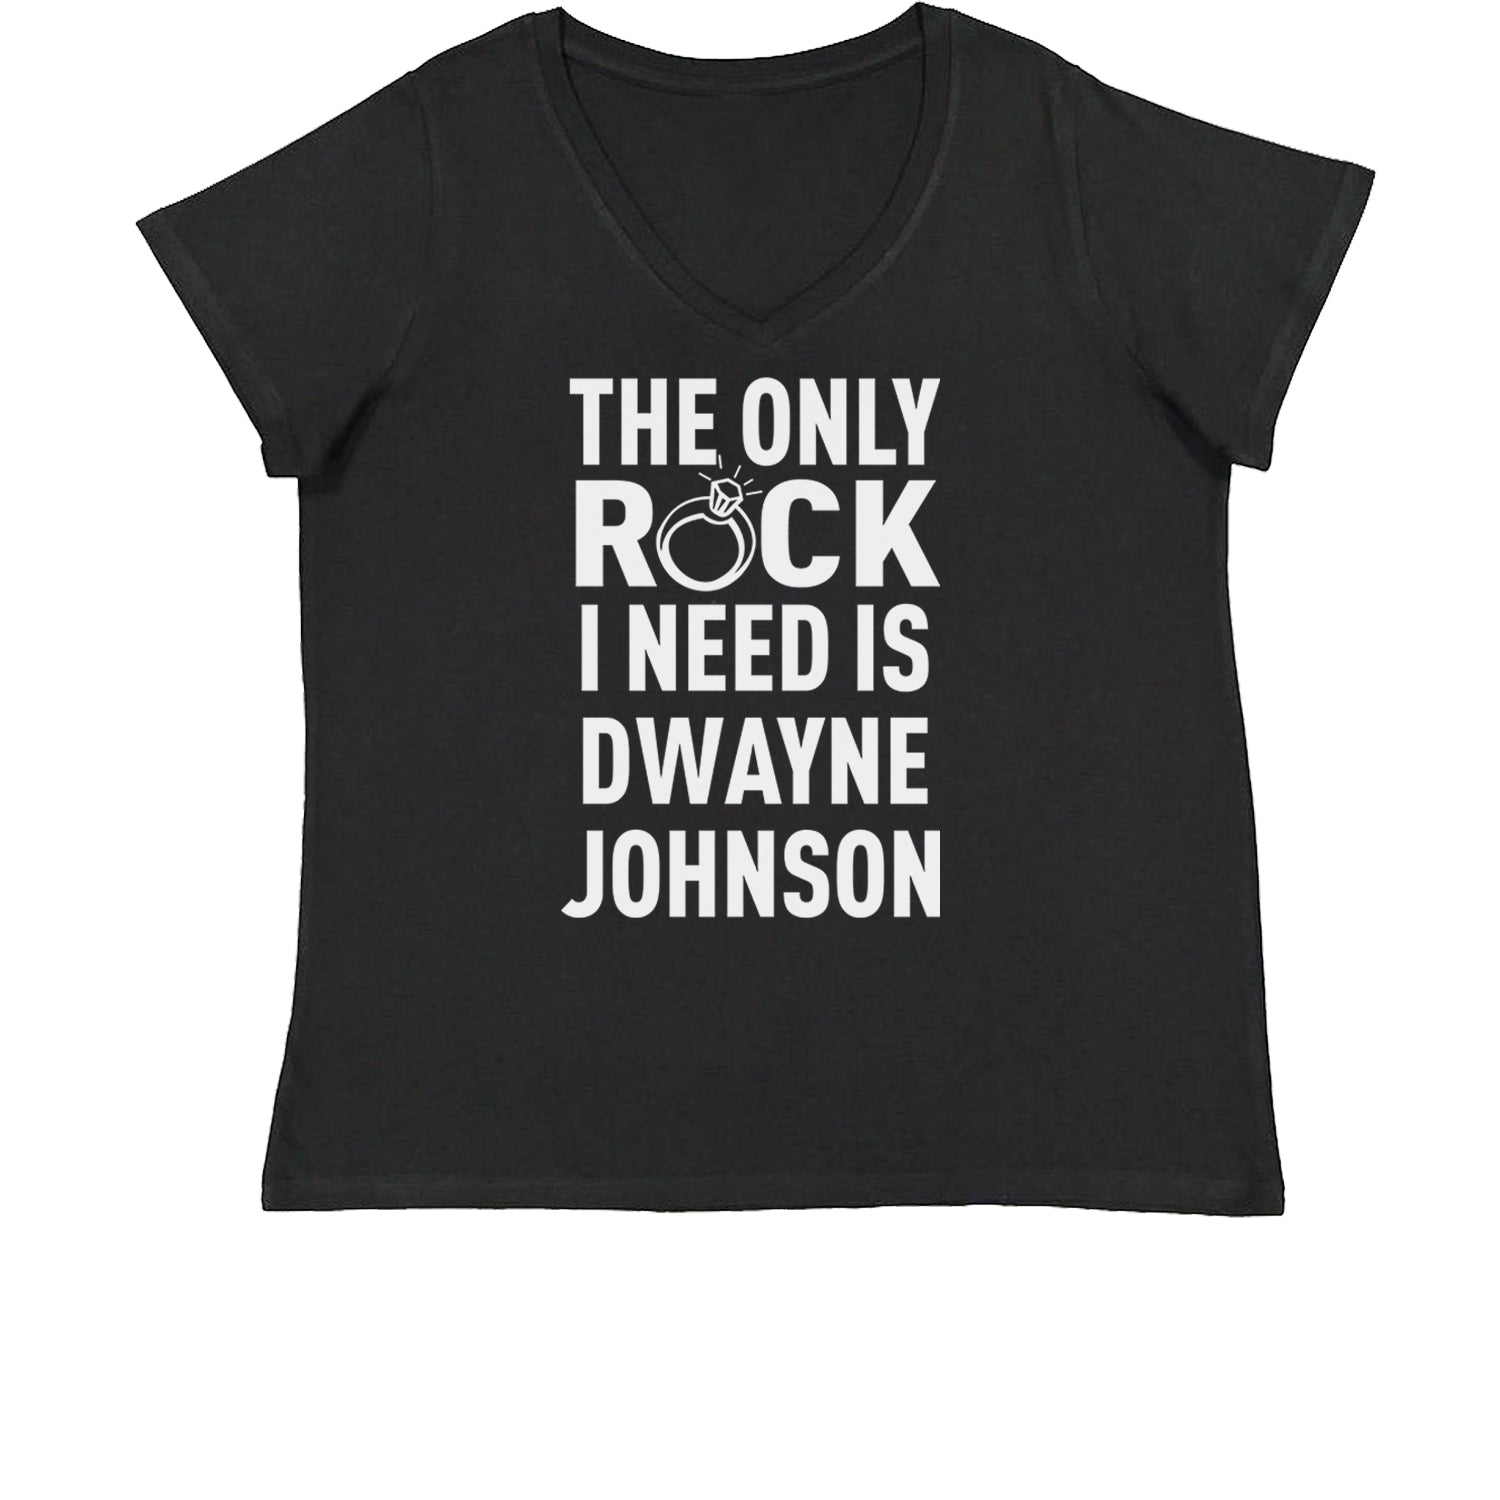 The Only Rock I Need Is Dwayne Johnson Womens Plus Size V-Neck T-shirt dwayne, johnson, marry, me, ring, rock, the, wedding by Expression Tees